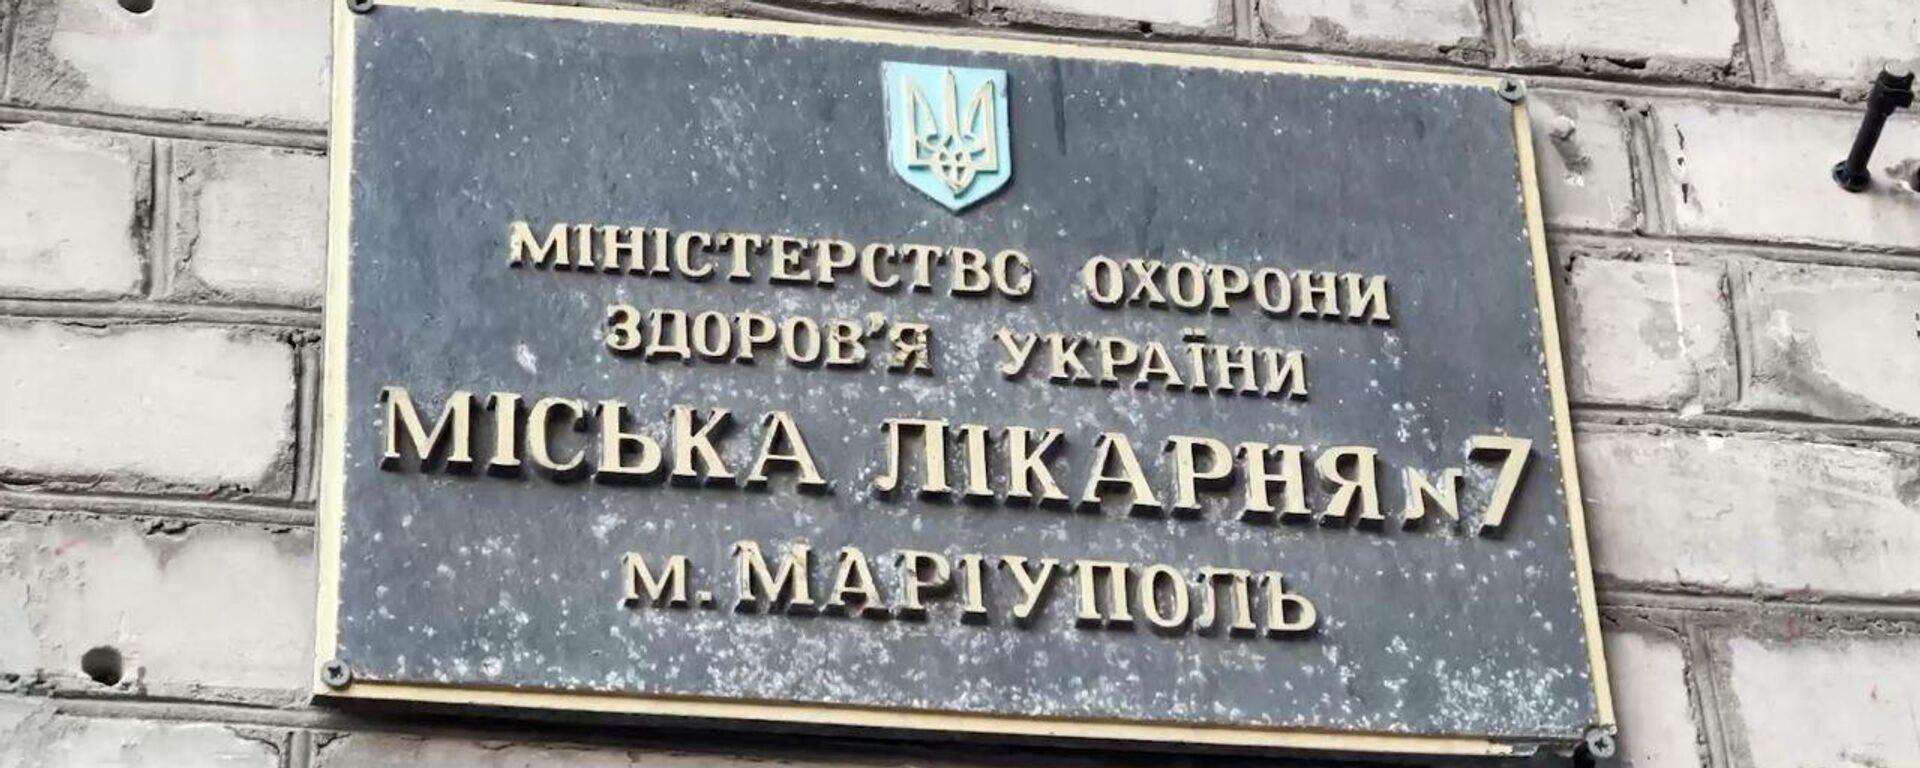 A frame from a report on the alleged use of children in medical experiments at hospital No. 7 in Mariupol by Ukrainian doctors. The frame shows the facade sign of the hospital, where the relevant documents was found. - Sputnik International, 1920, 12.02.2024